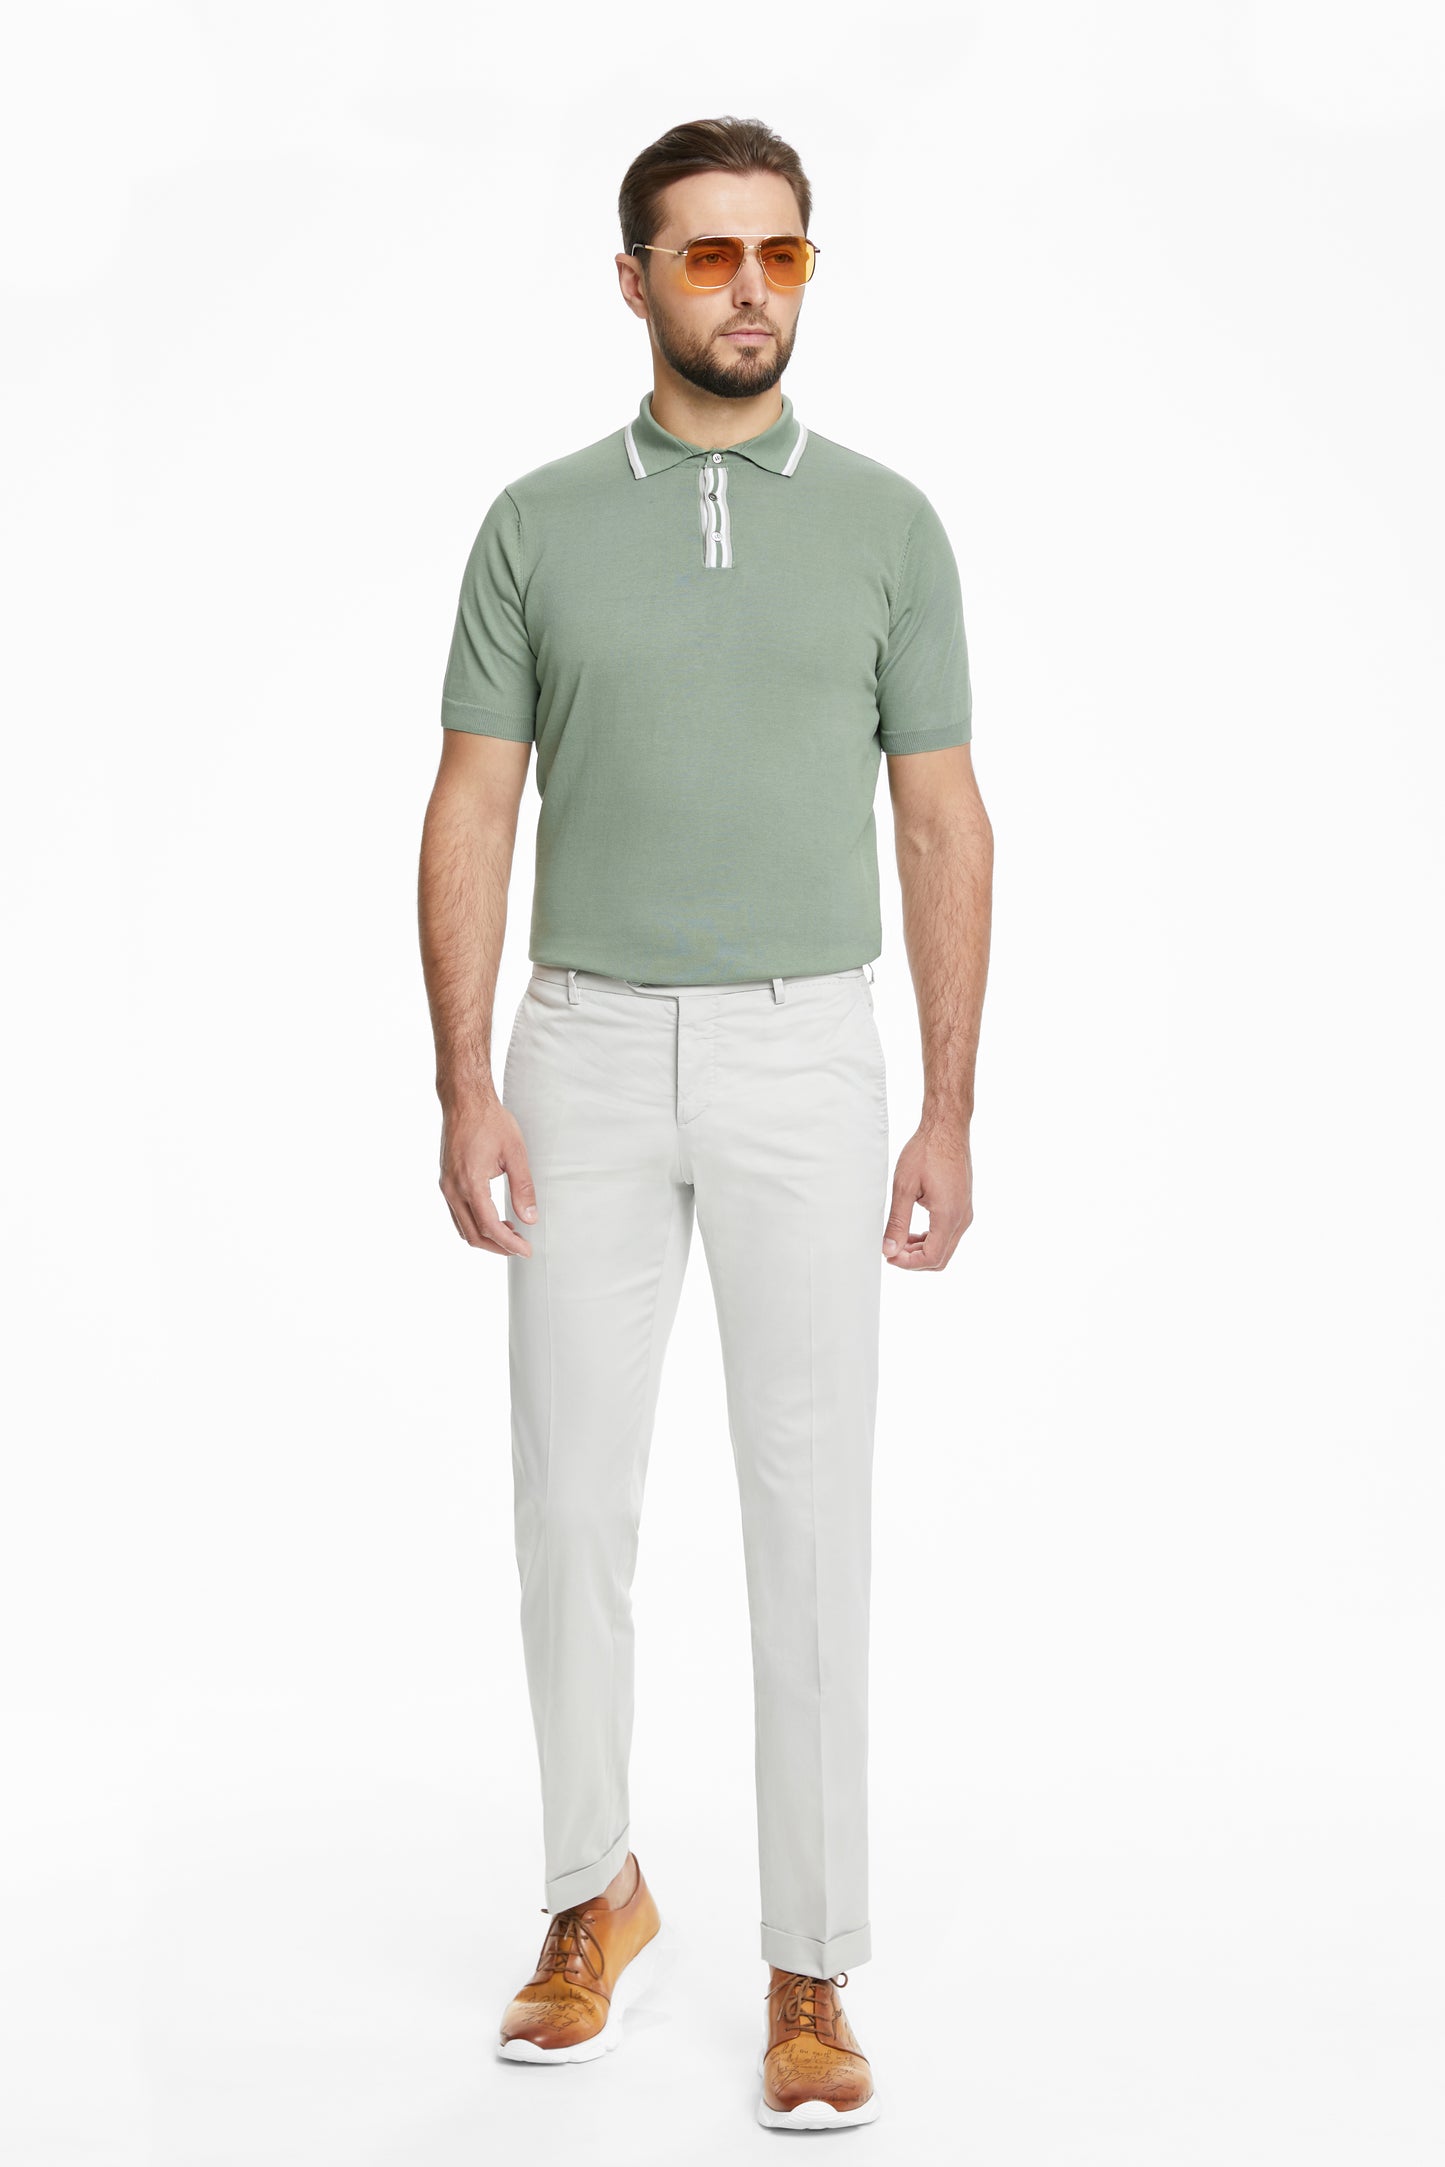 Beige CHINOS Trousers